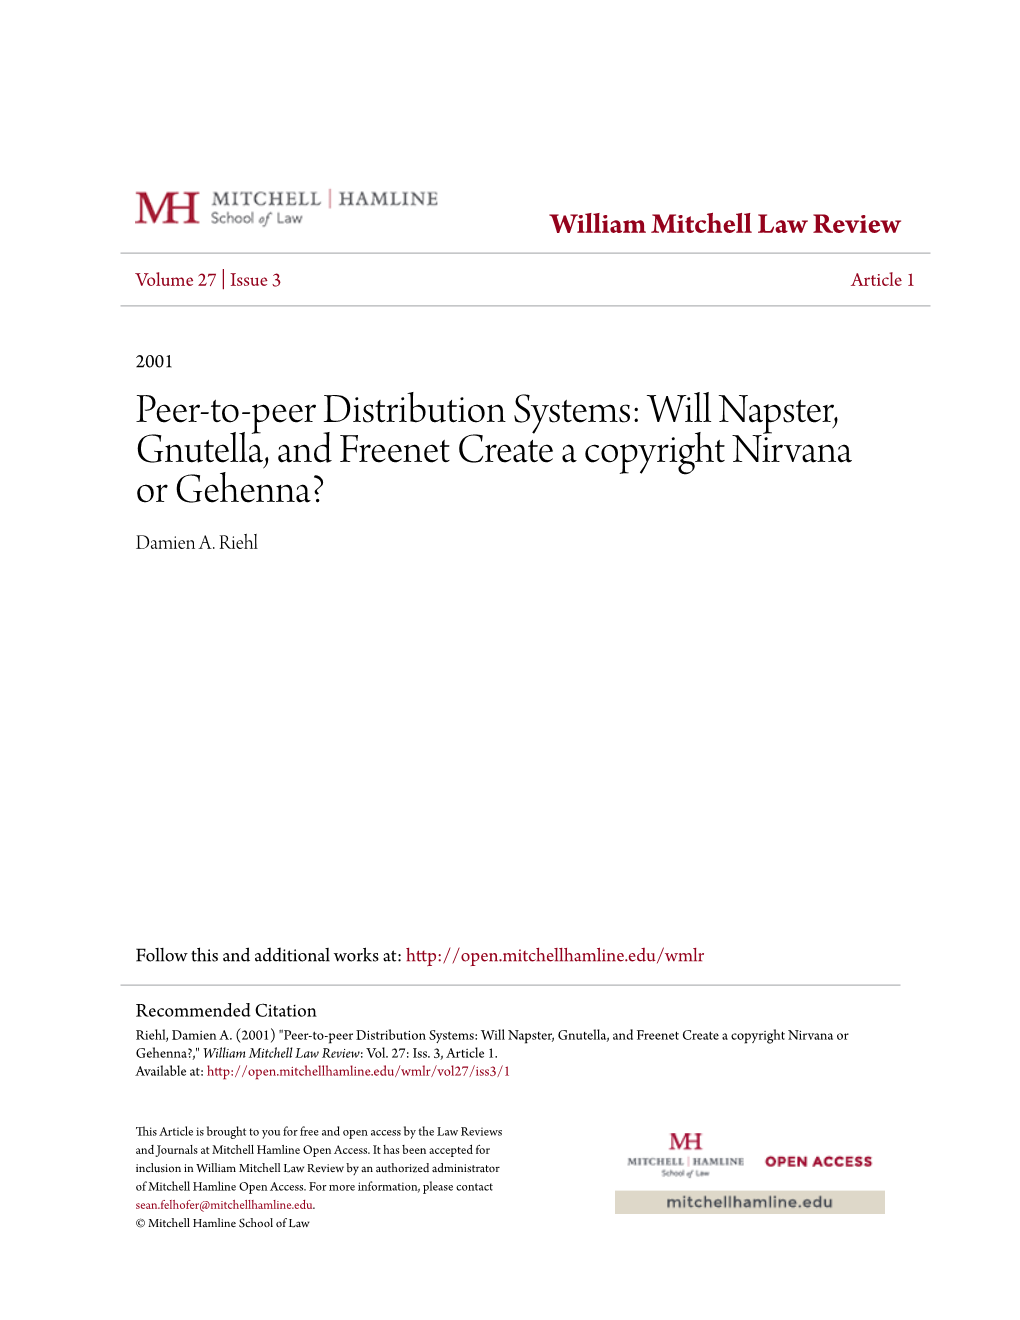 Peer-To-Peer Distribution Systems: Will Napster, Gnutella, and Freenet Create a Copyright Nirvana Or Gehenna? Damien A